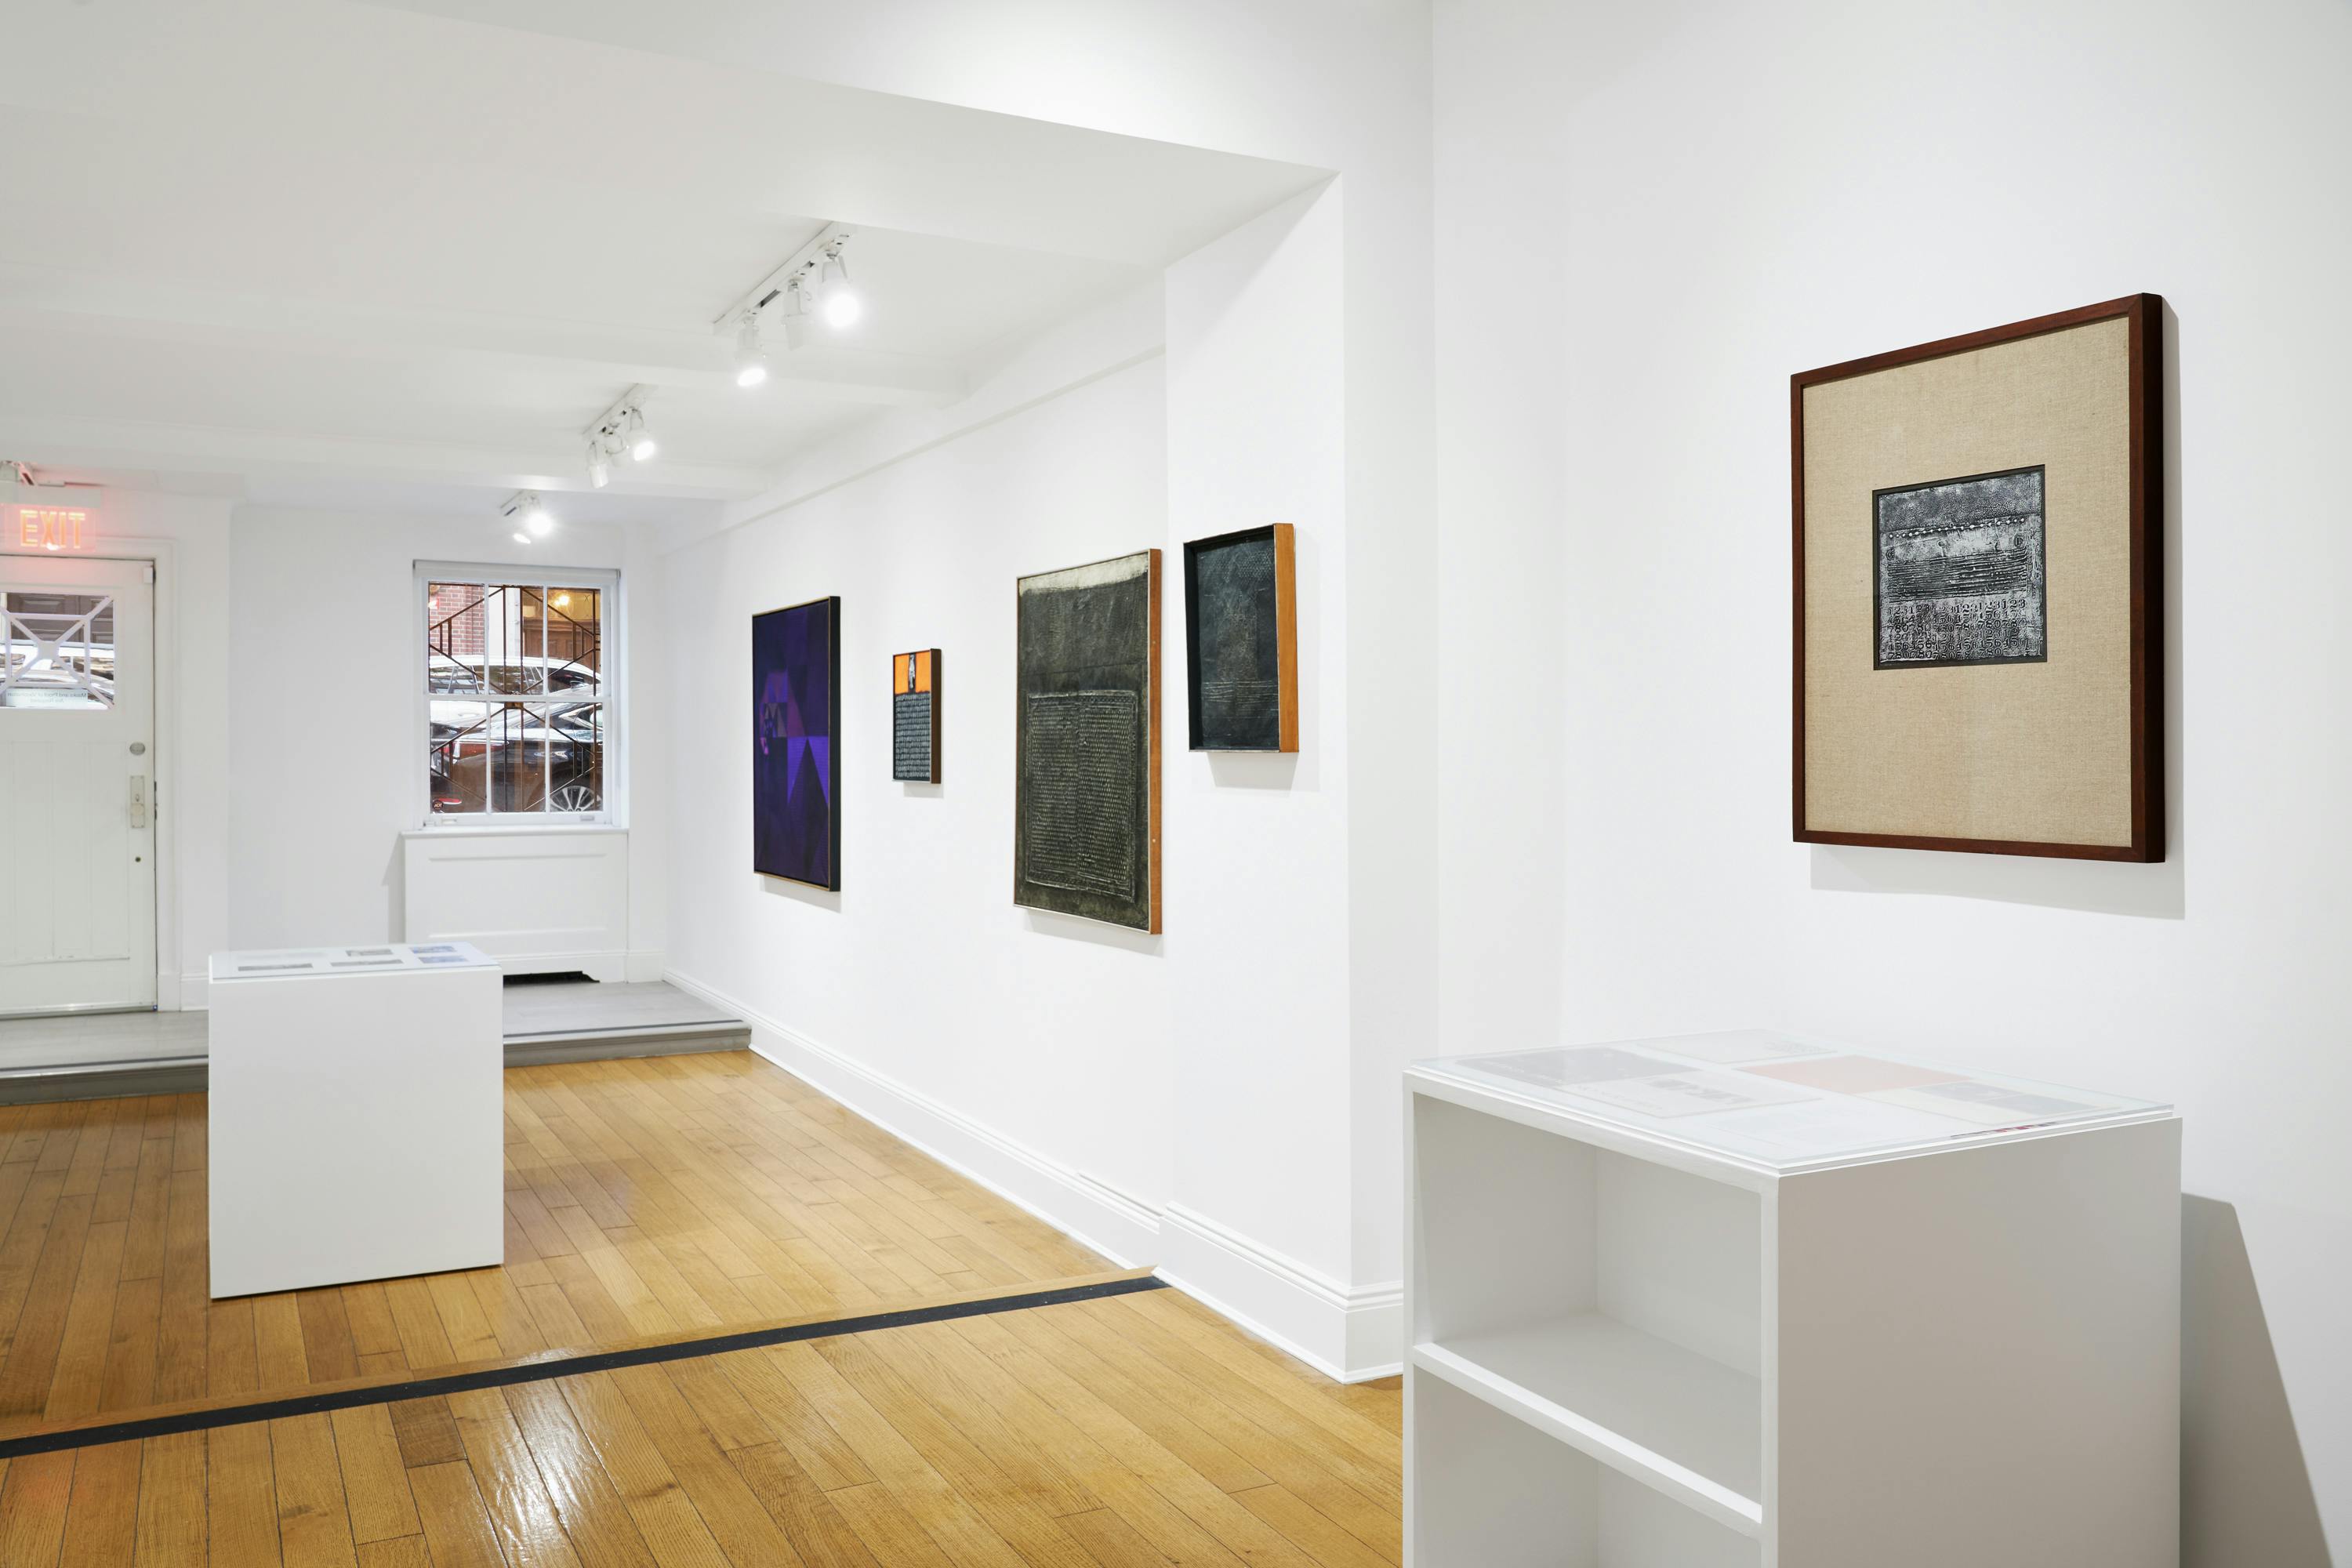 Installation view of José Antonio Fernández-Muro: Geometry in Transfer exhibition showing five paintings and two vitrines.